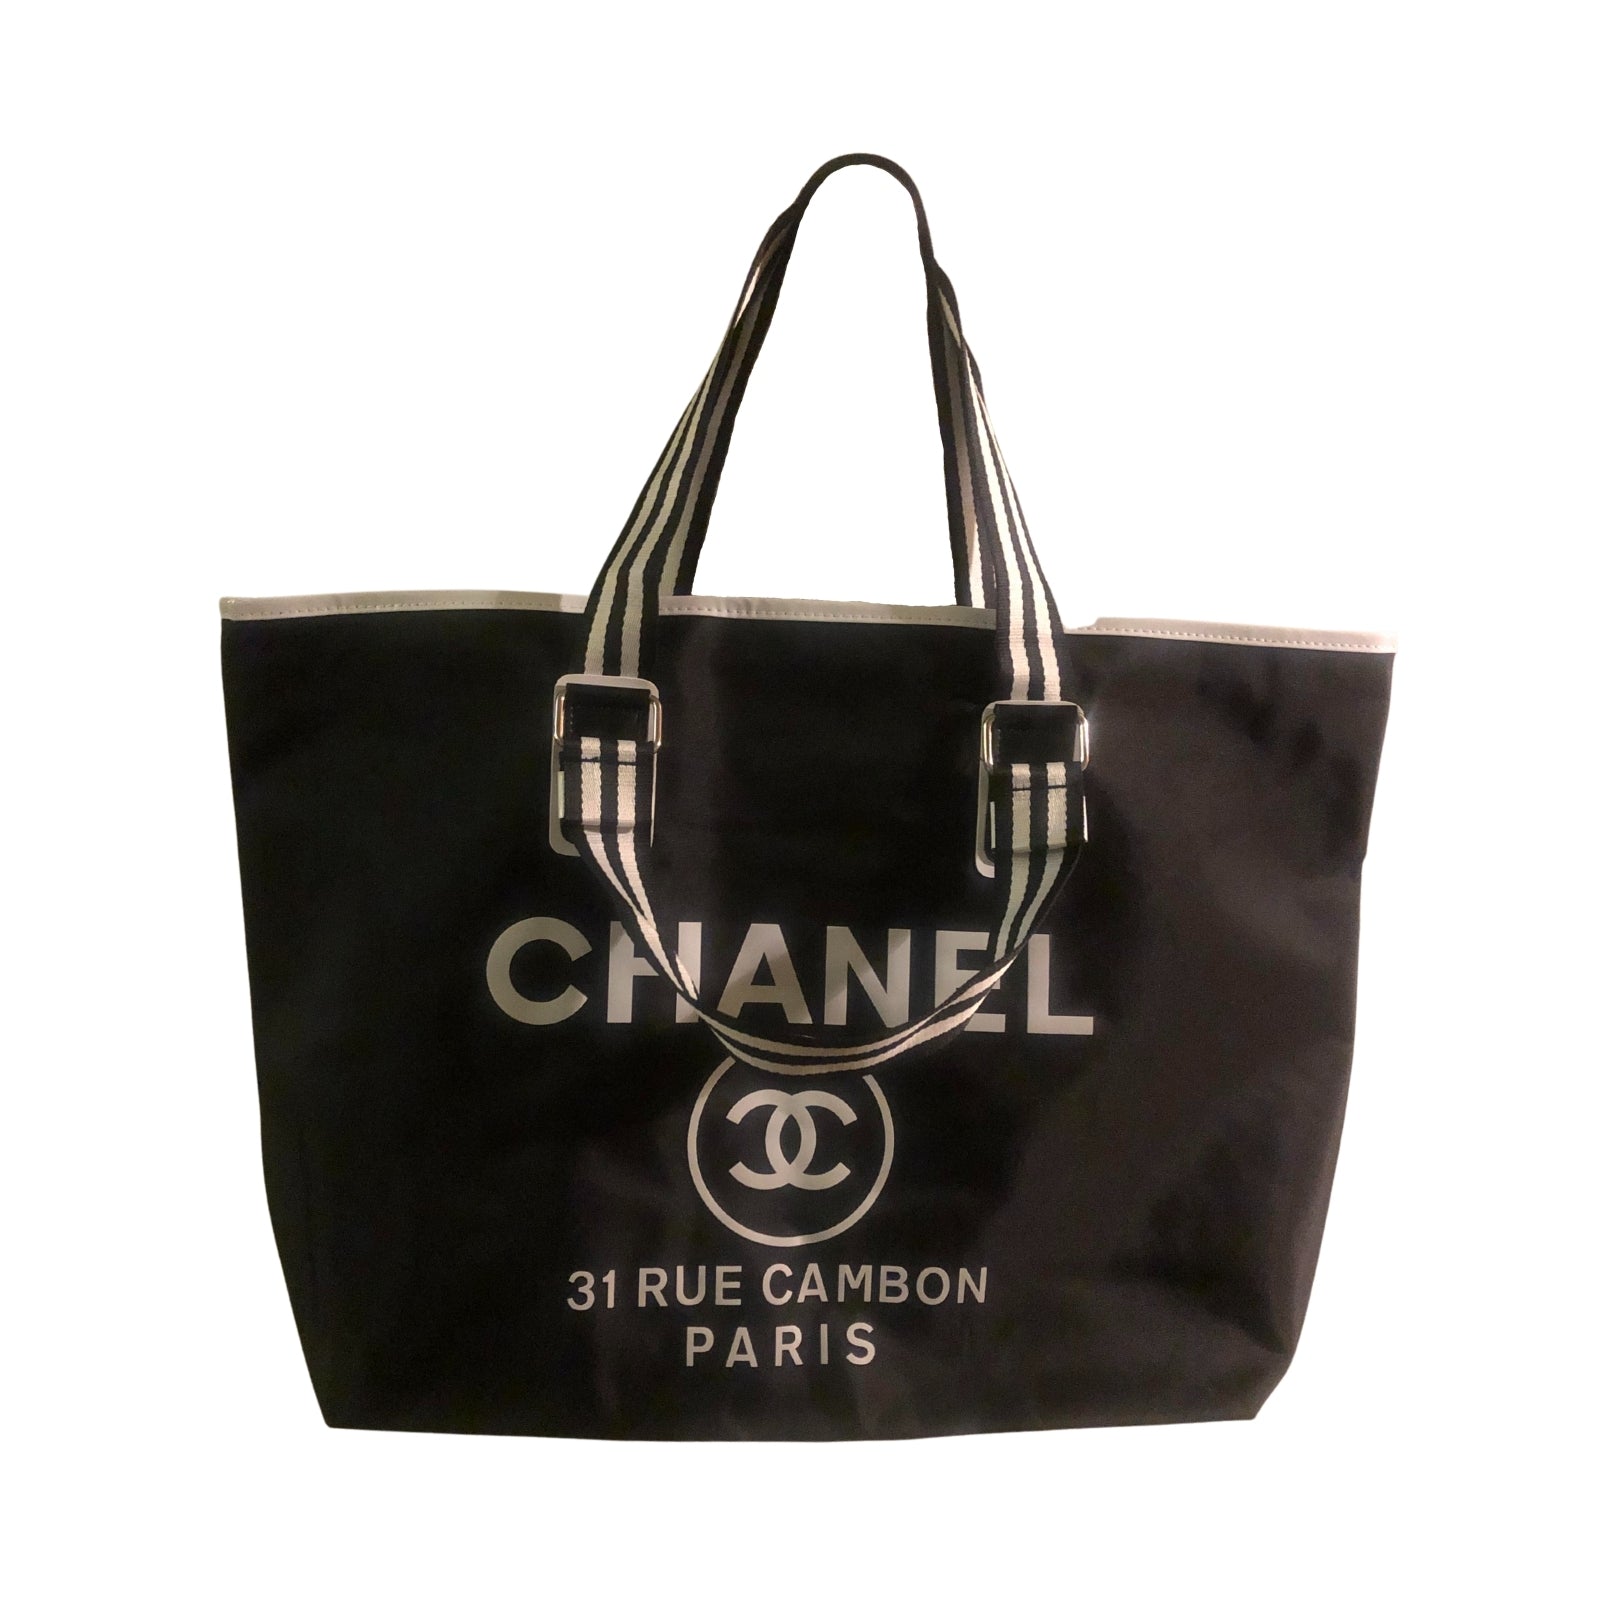 CHANEL White Makeup Bags & Cases for sale